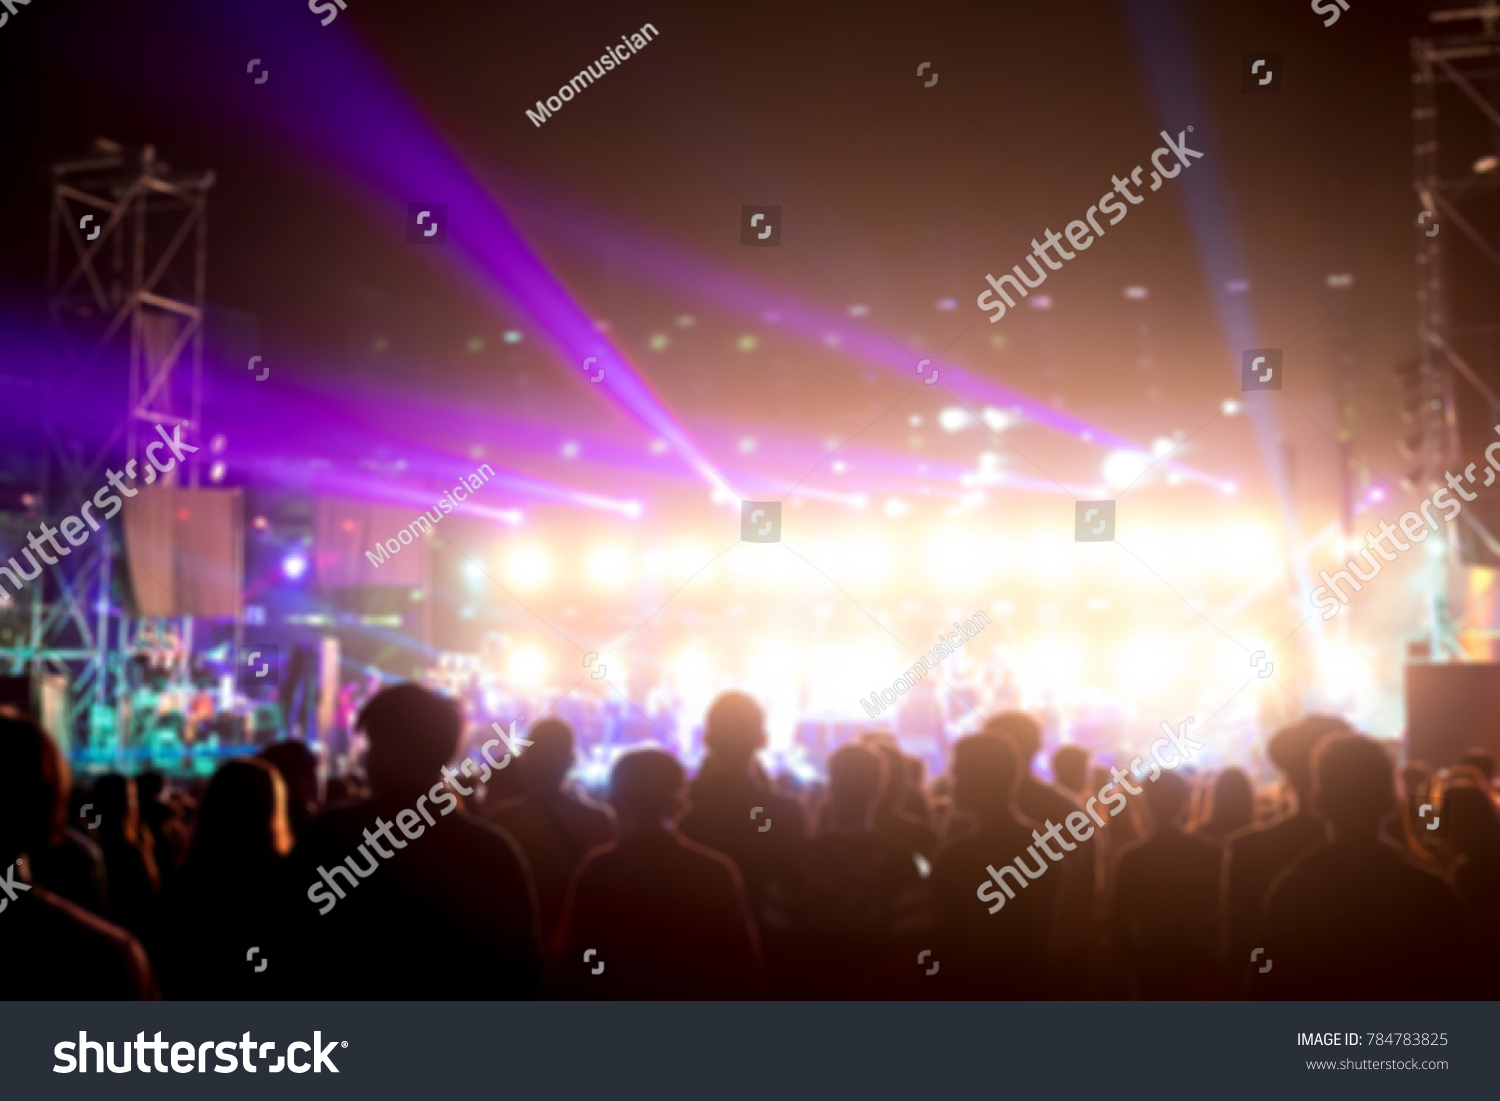 Blurred background : Bokeh lighting in outdoor concert with cheering audience #784783825